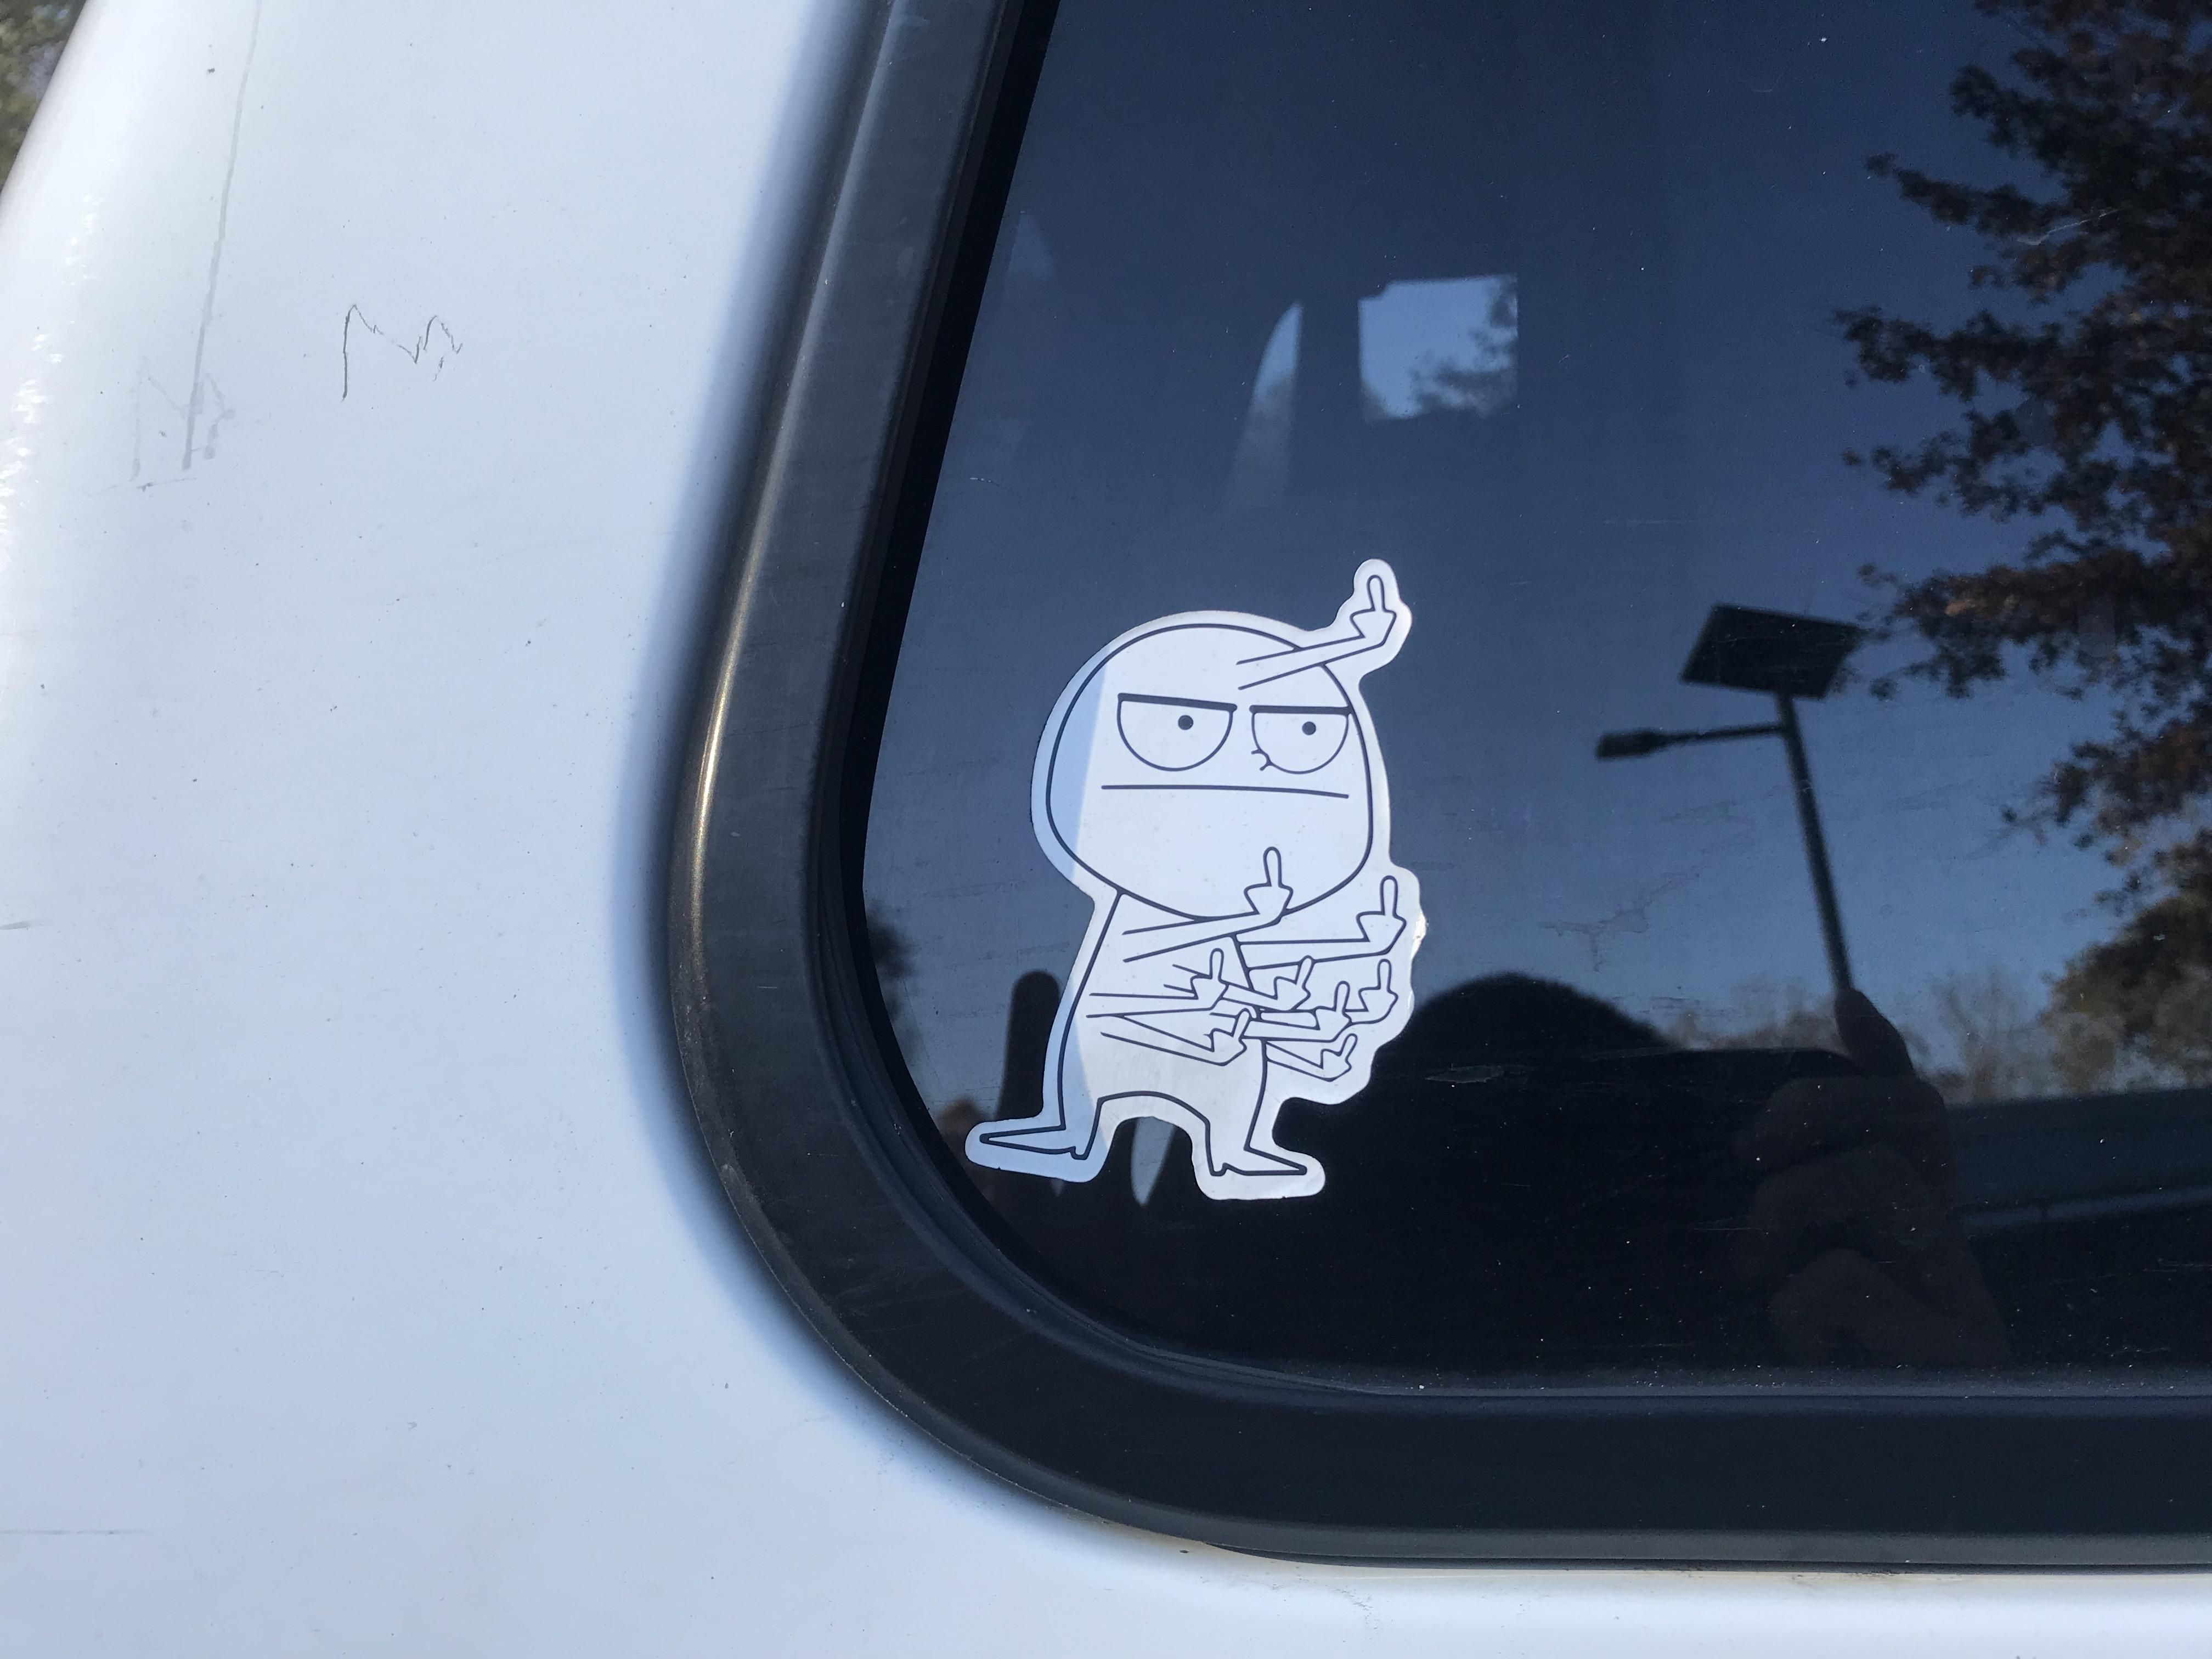 Went to the park yesterday, and saw this on a neighboring car.